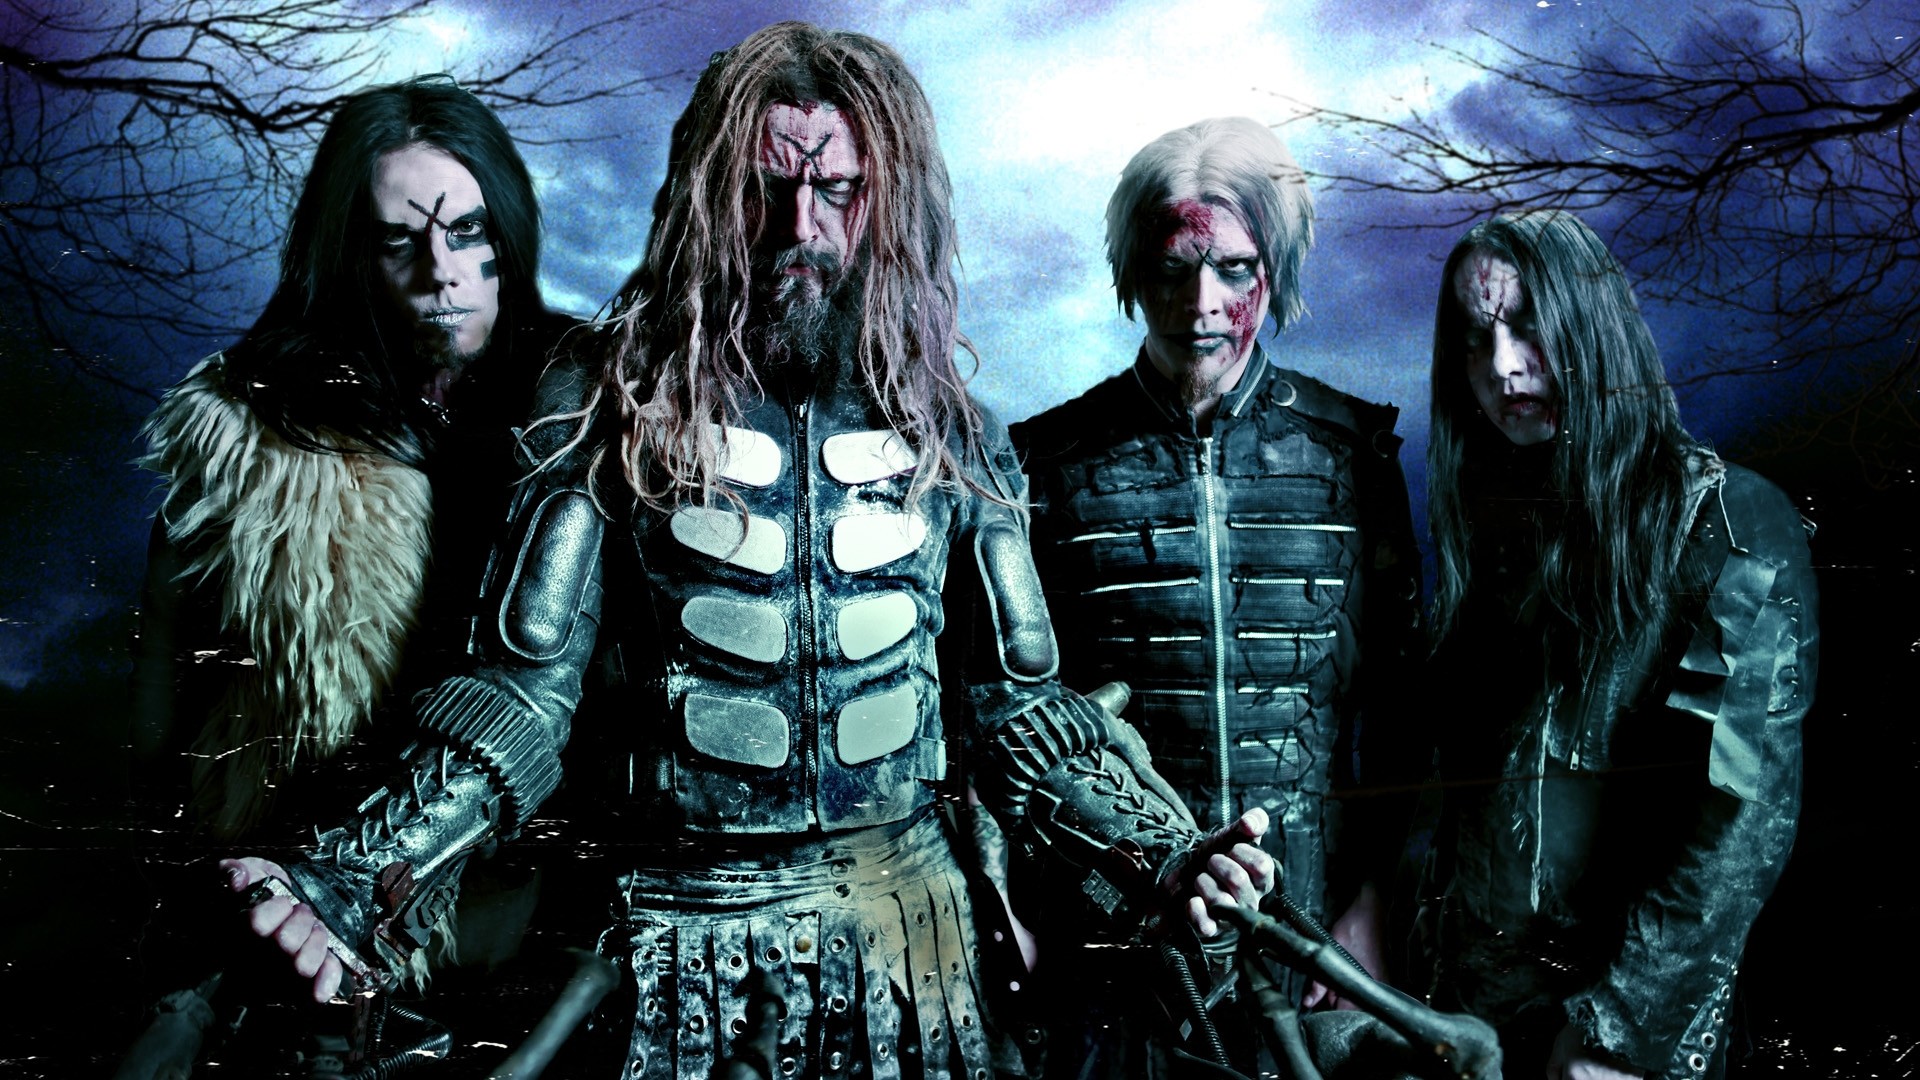 1920x1080 Download Wallpaper  rob zombie, image, band, members, twilight  Full HD 1080p HD Background